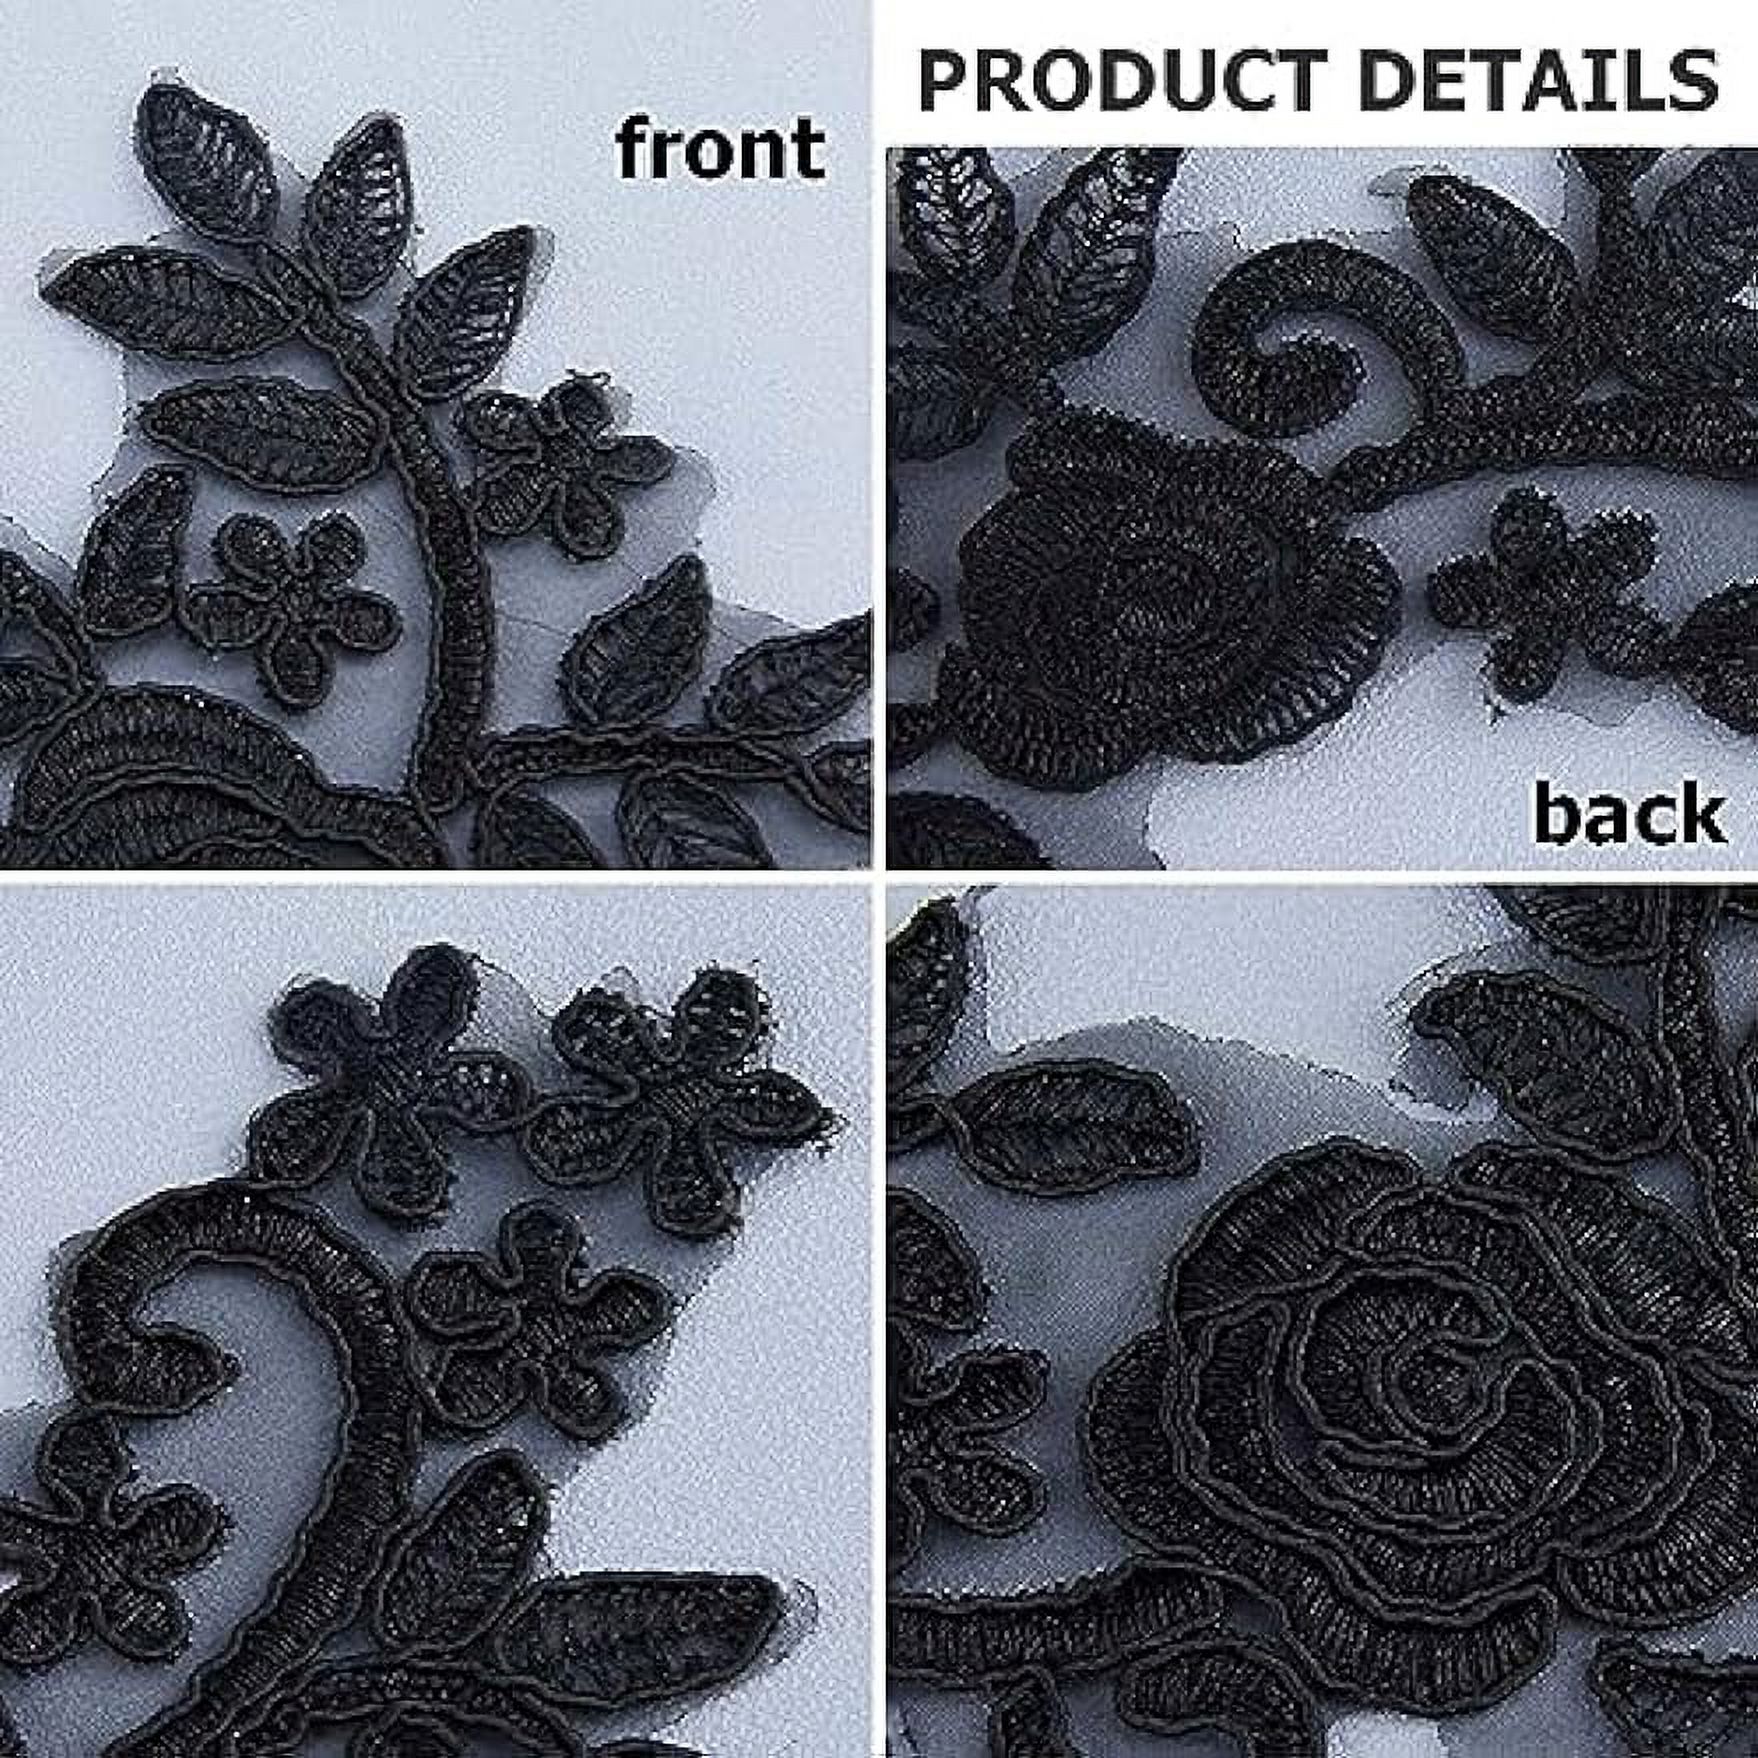 4Pcs Floral Lace Applique Black Flower Embroidered Sew on Patches Rose Leaves Collar Fabric Applique for DIY Sewing Crafts Dress Clothing Backpacks Embellishments 36x14.5cm - image 3 of 9